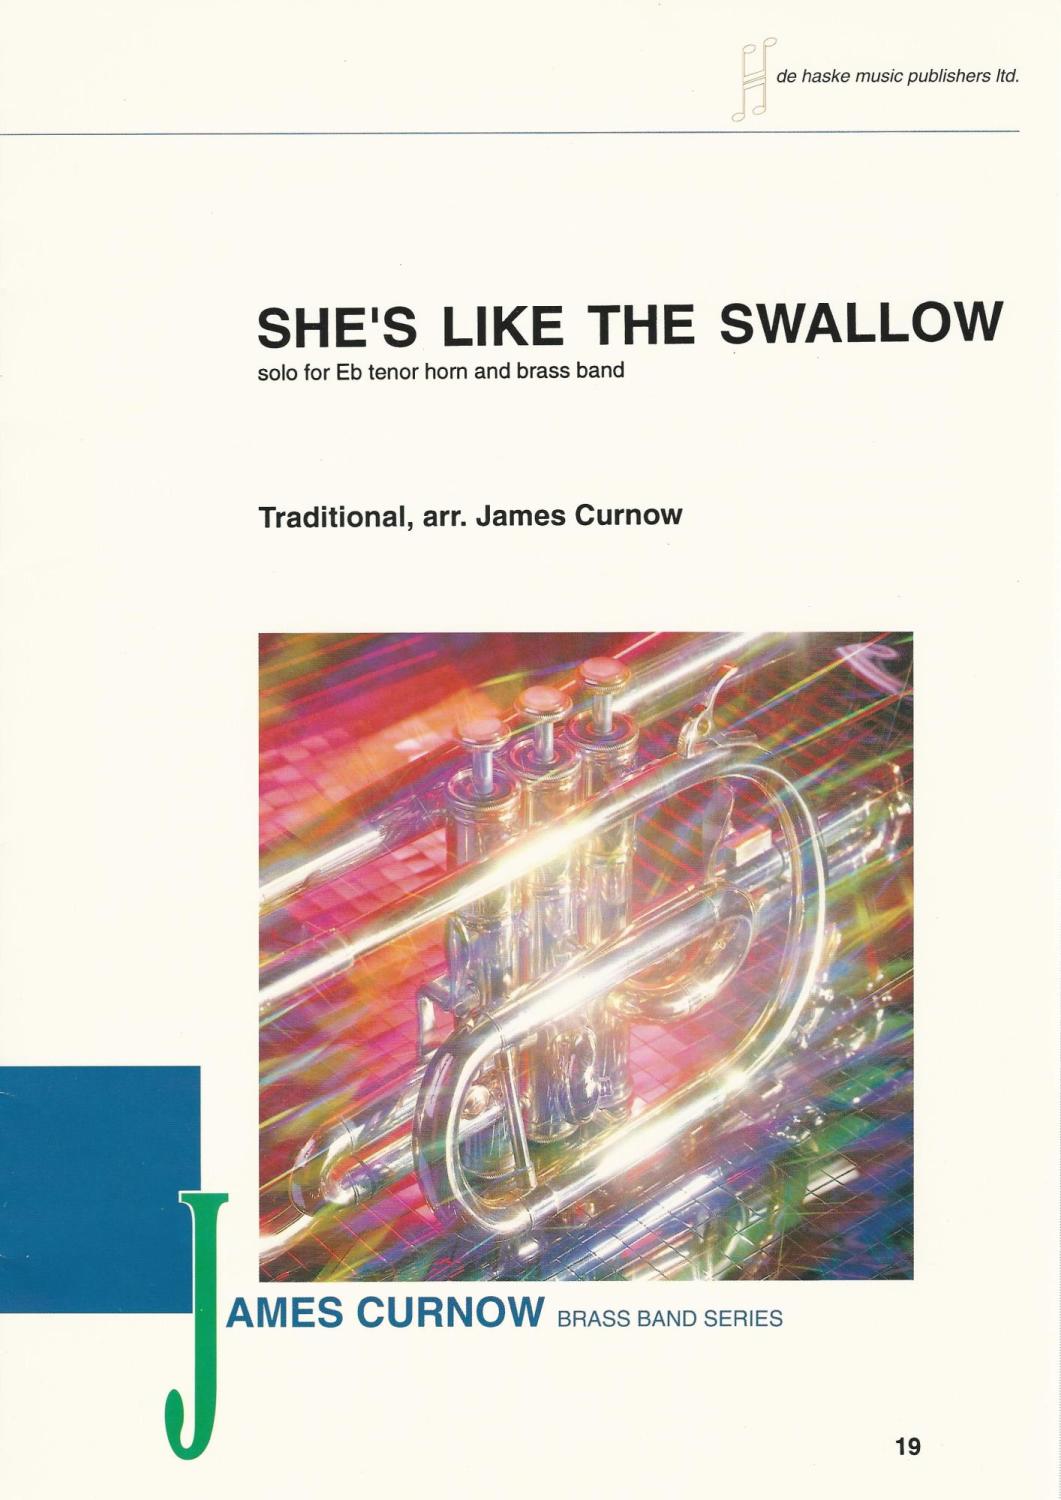 She's Like The Swallow for Eb Horn and Brass Band - Trad., arr. James Curno